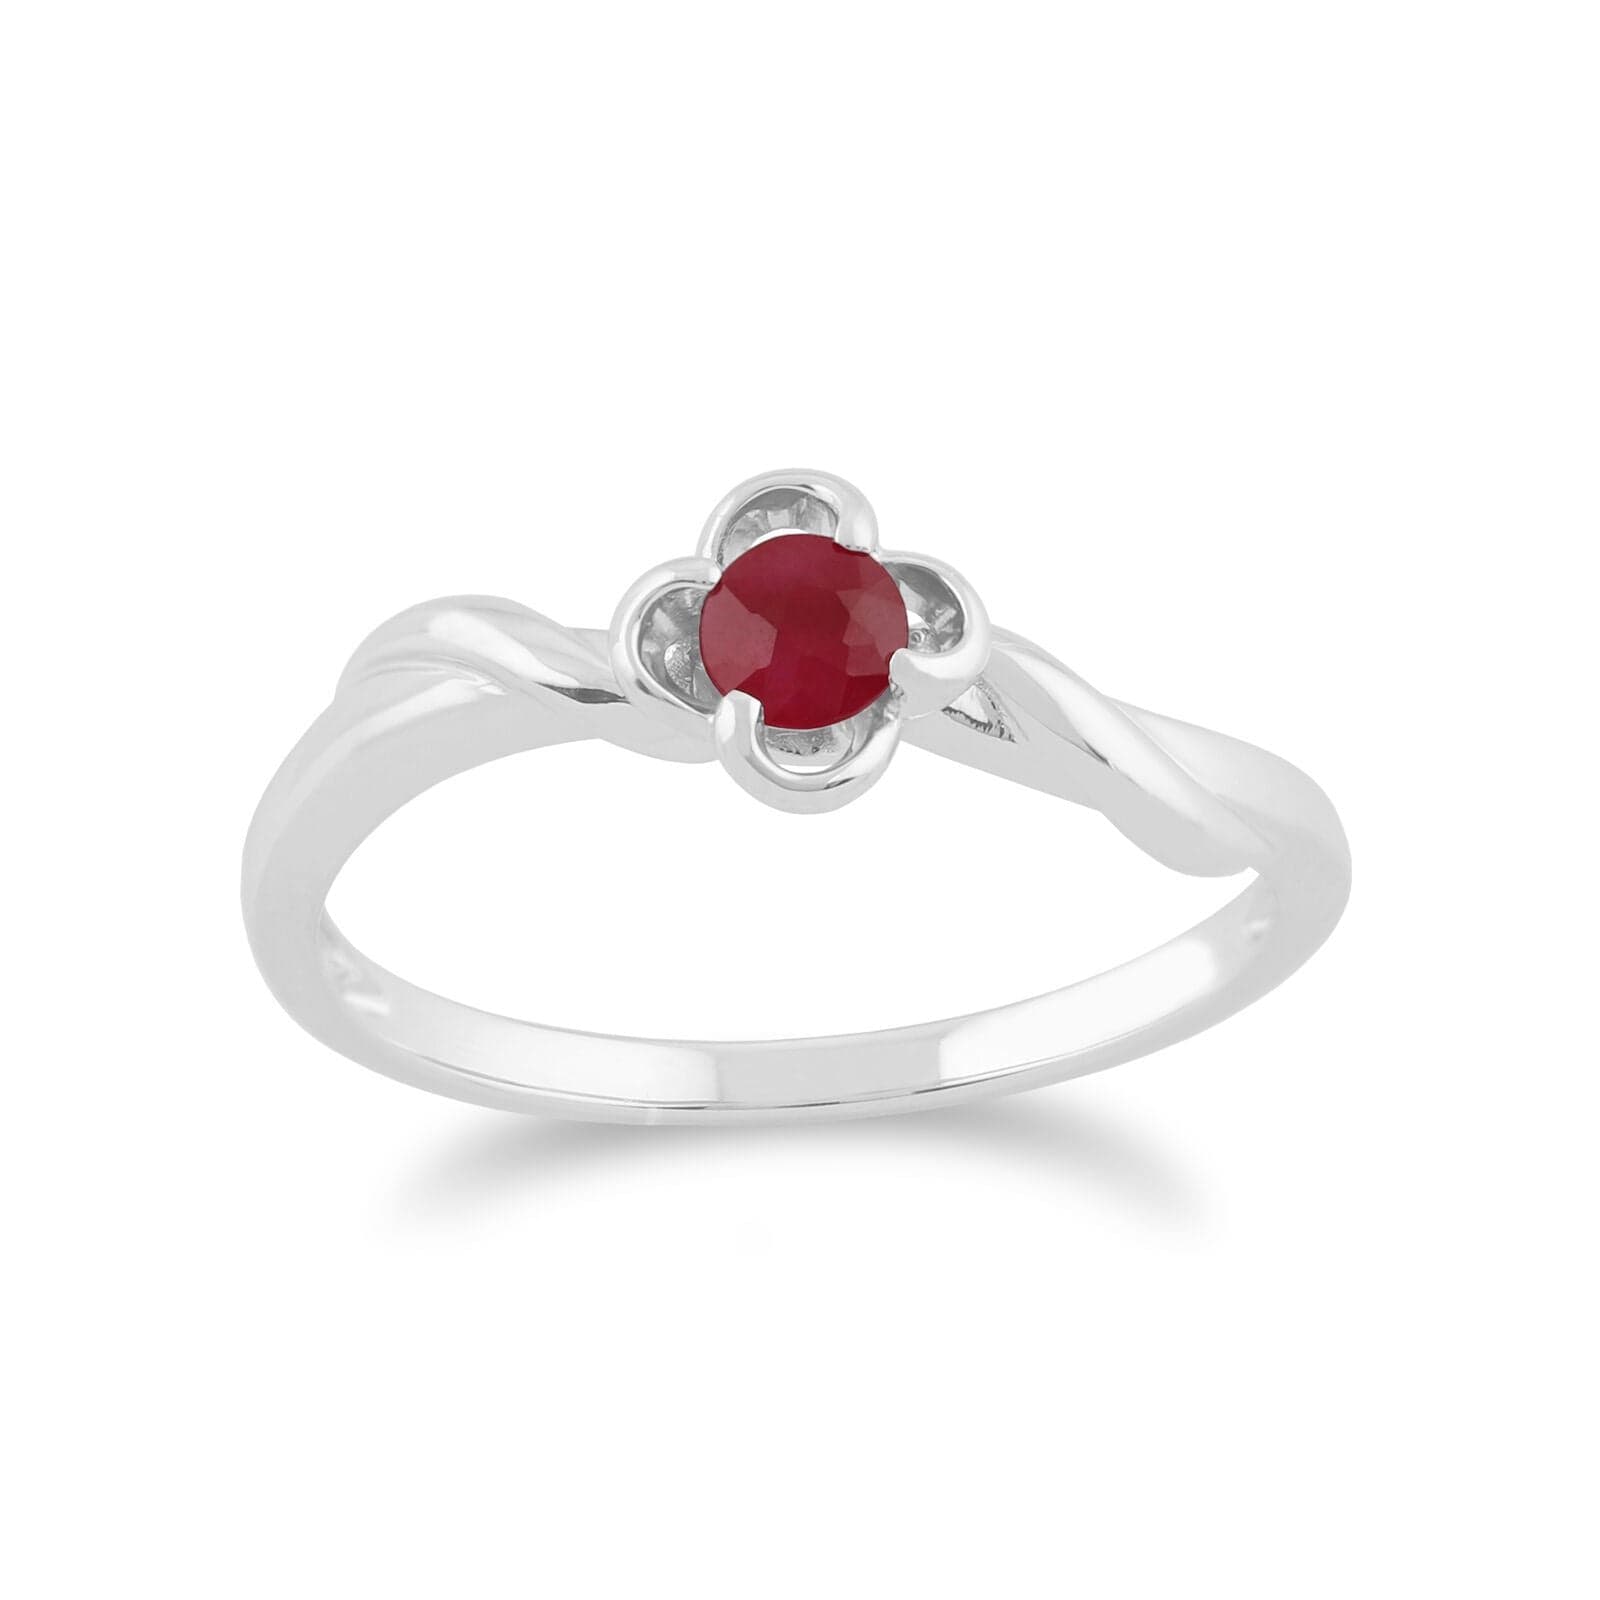 162R0134039 Gemondo 9ct White Gold 0.27ct Ruby Floral Ring 1